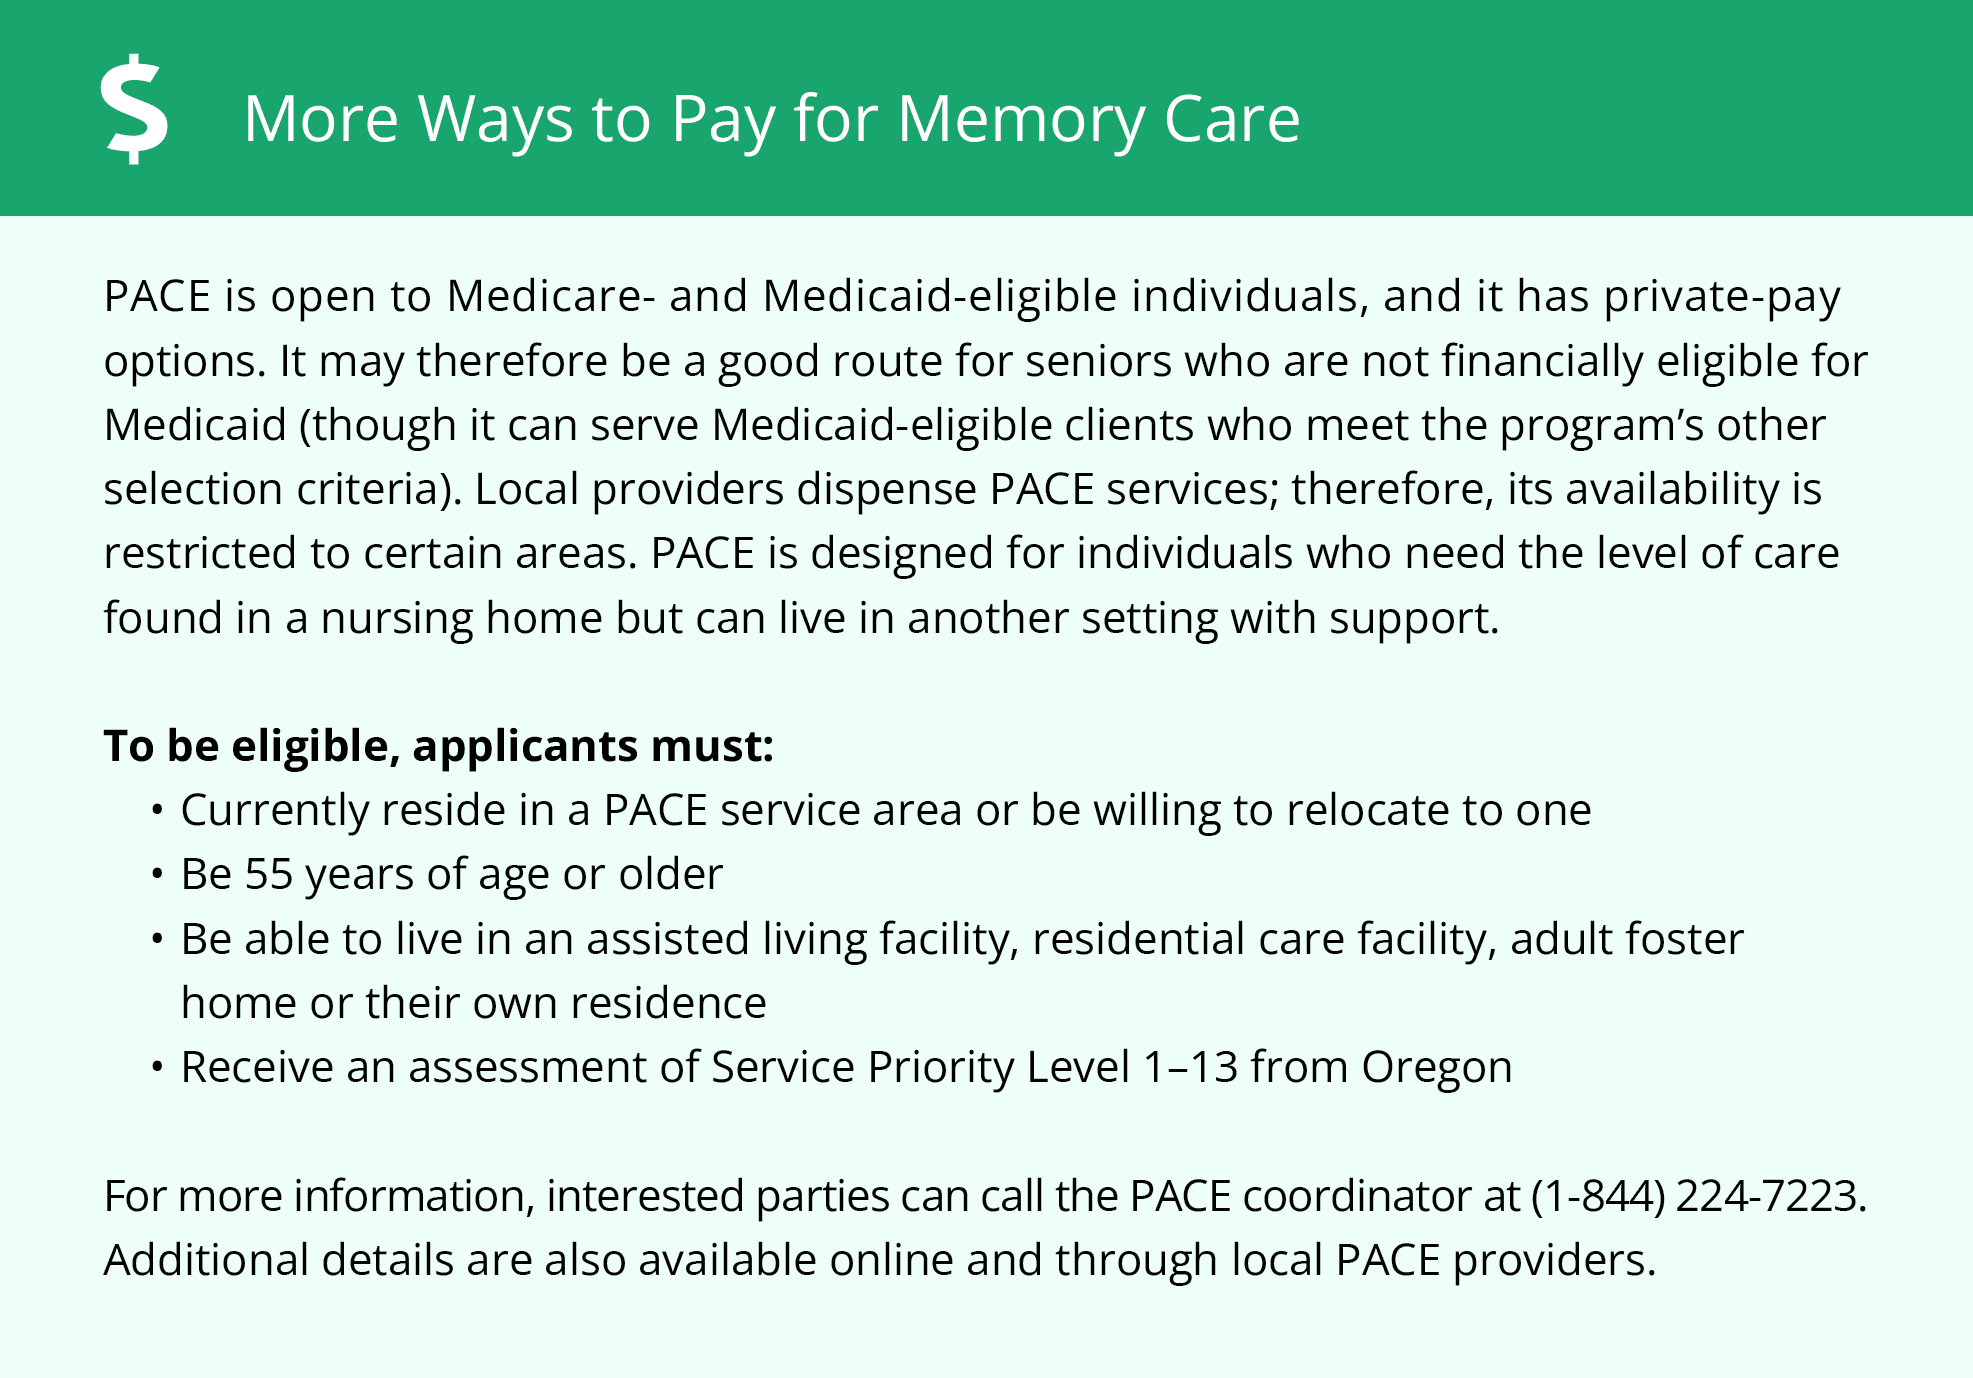 Financial Assistance for Memory Care in Oregon